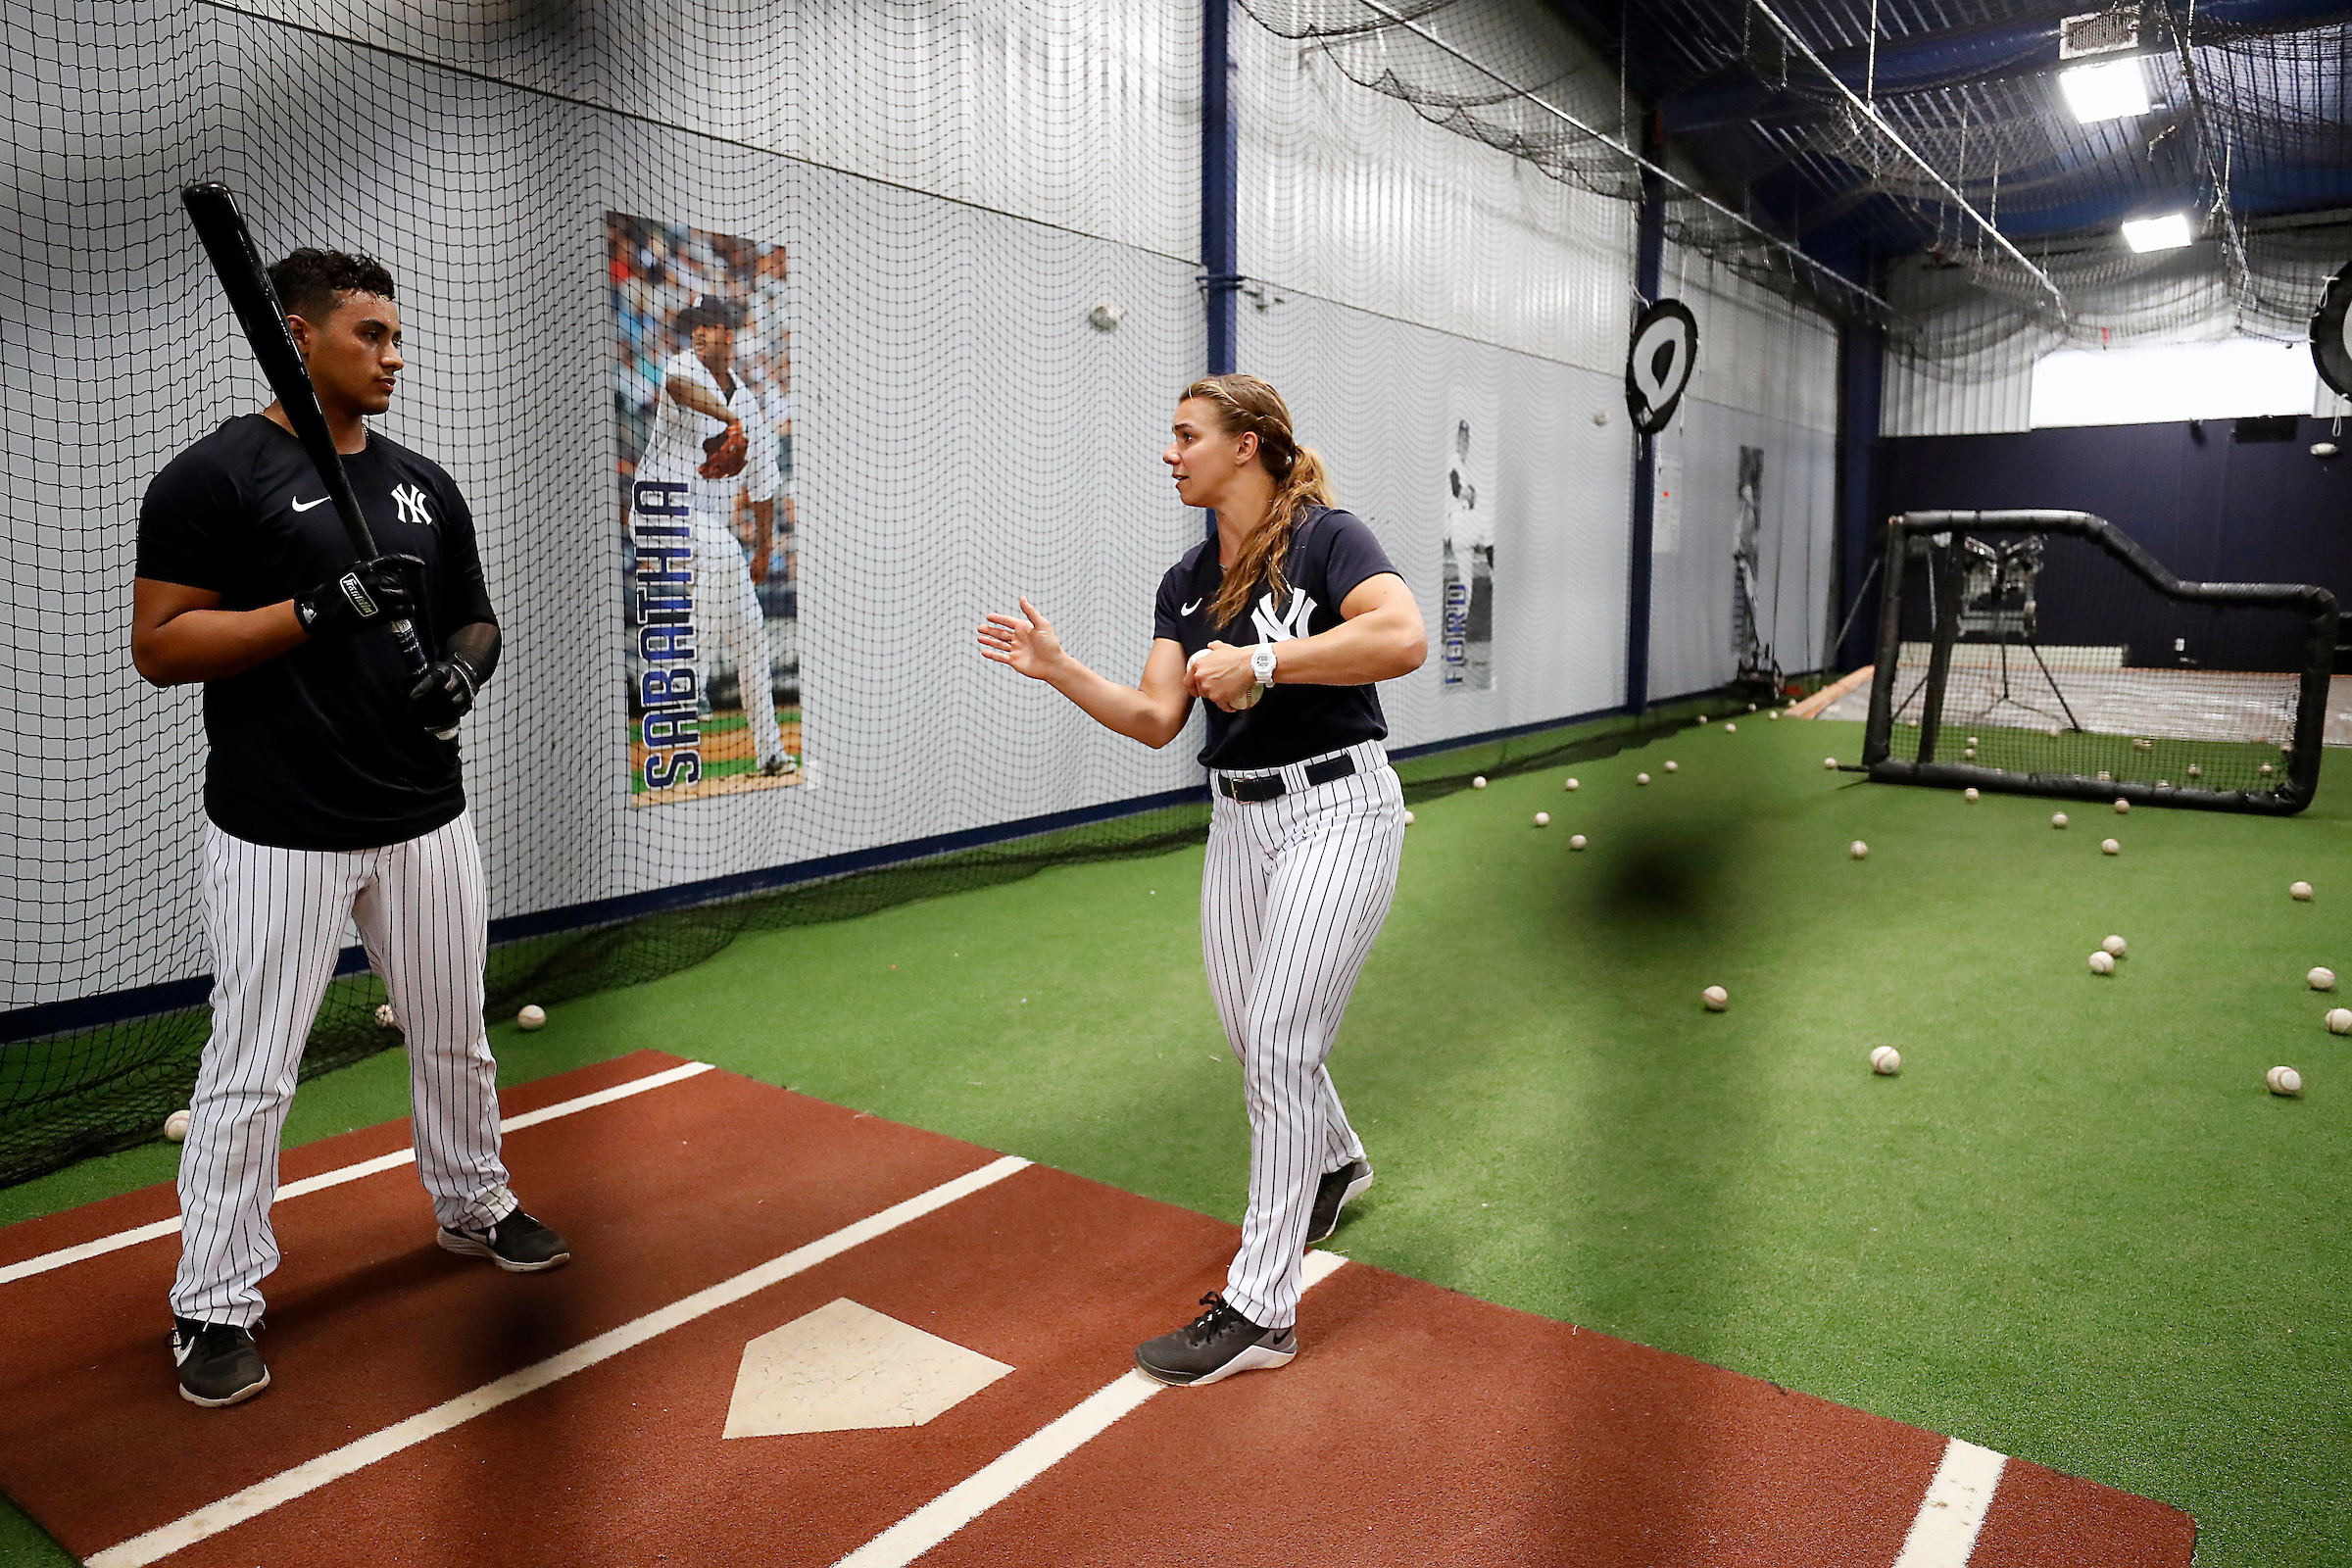 New Yankees Low A manager Rachel Balkovec, the first woman to be